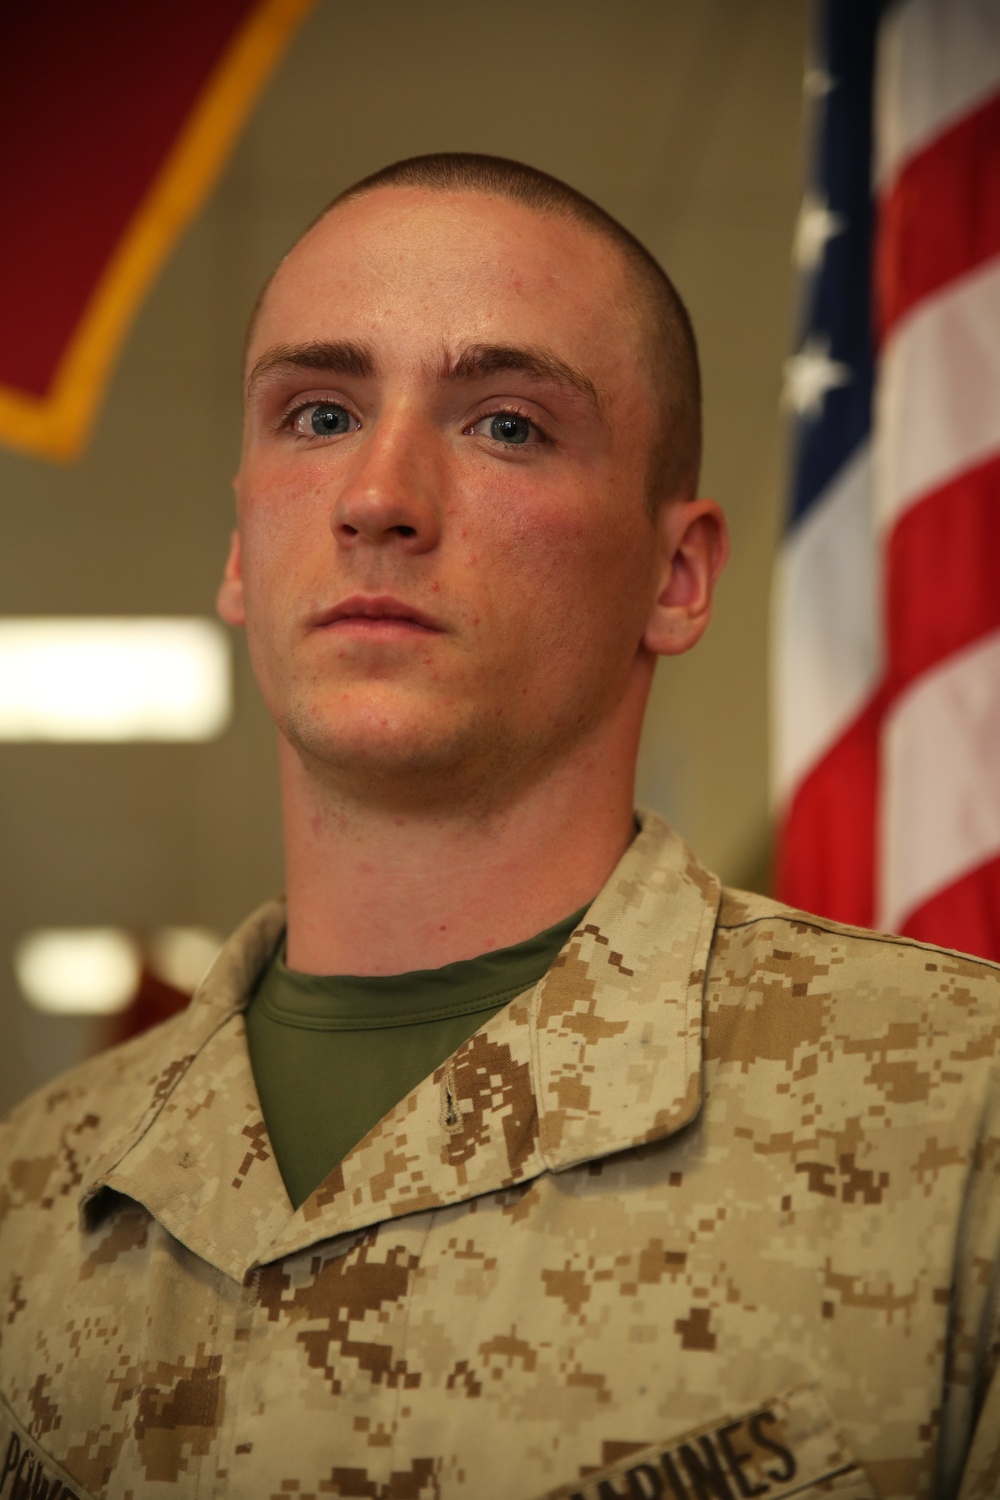 Manchester, N.H., native training at Parris Island to become U.S. Marine